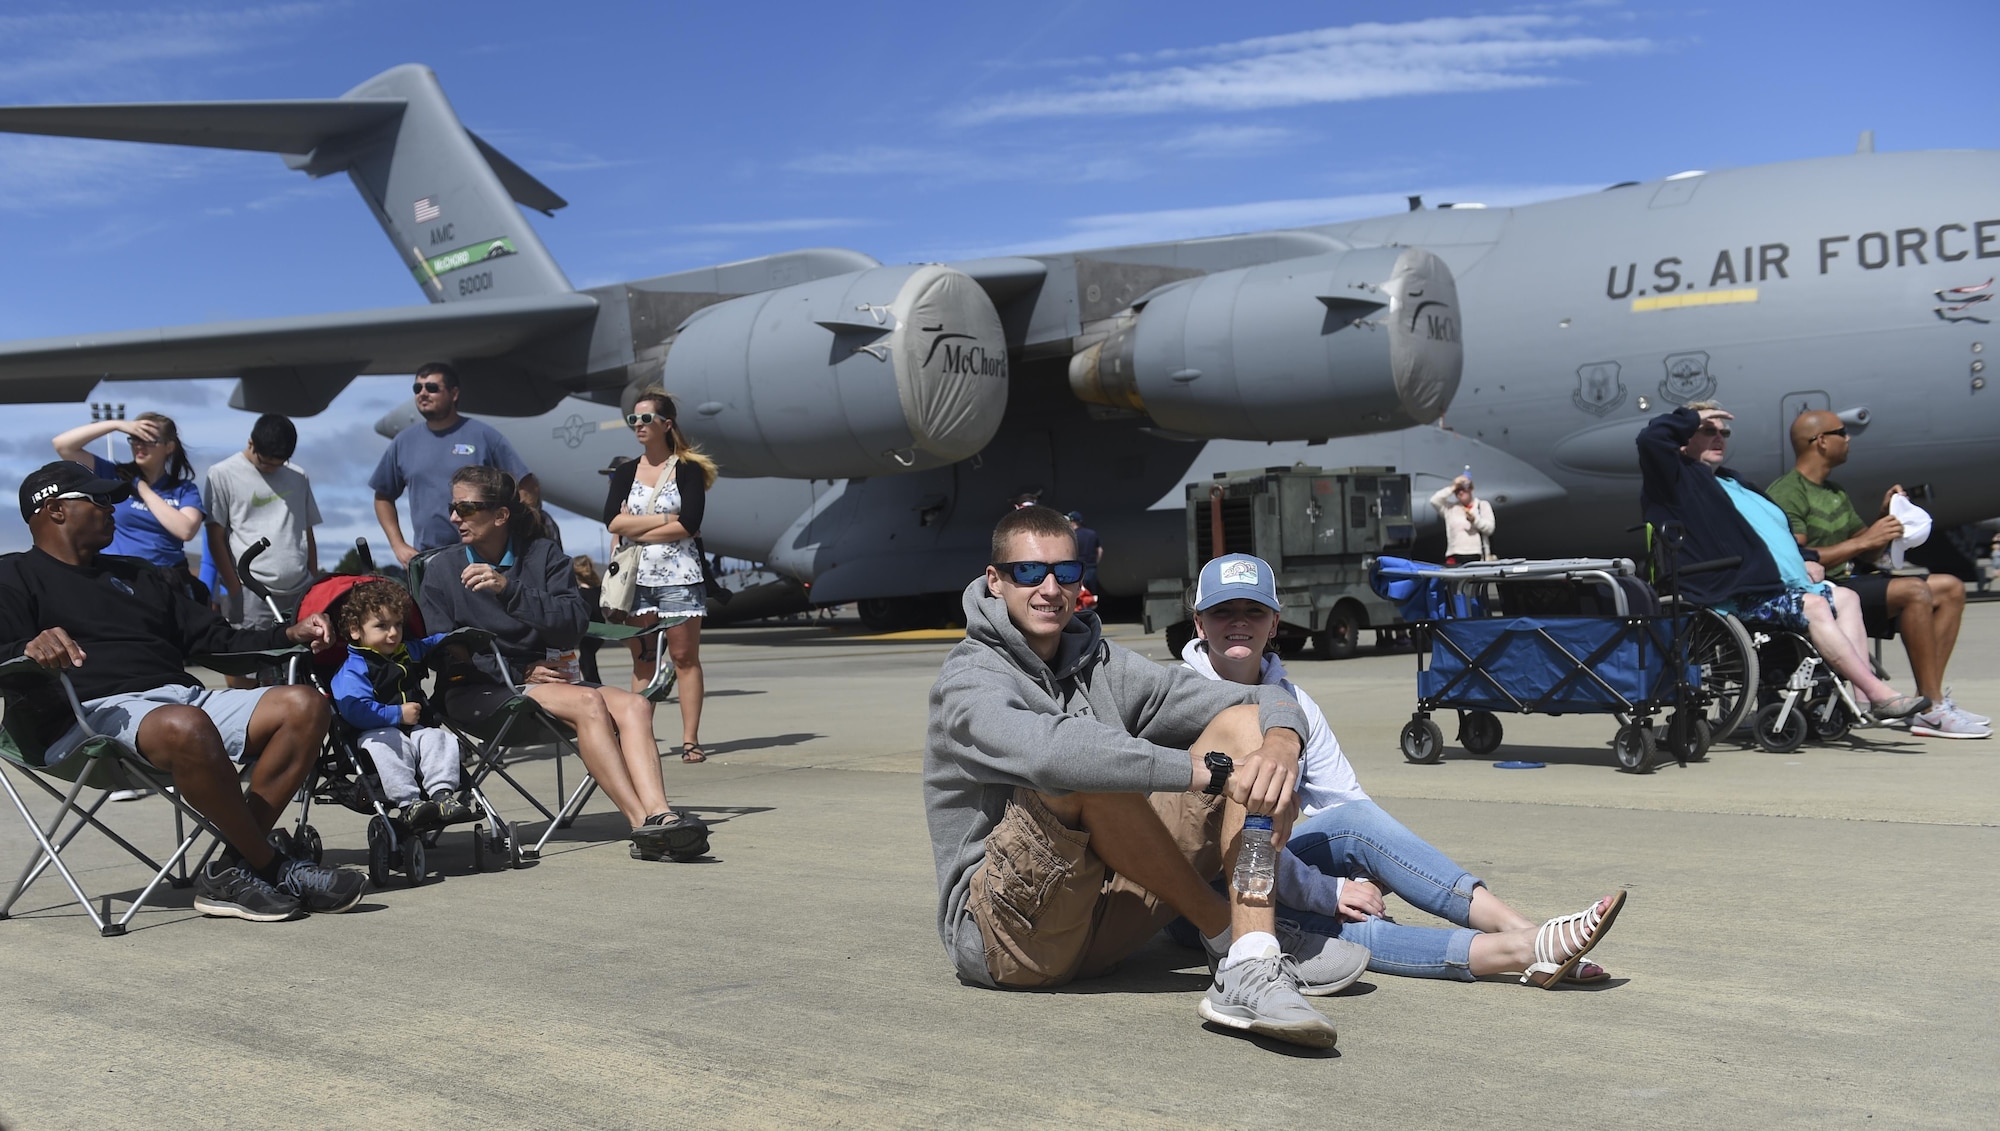 Guests sit and watch air craft performances during the Joint Base Lewis-McChord Airshow and Warrior Expo Aug. 28, 2016, at JBLM, Wash. Thousands watched the air performances during the two-day event, which included more a dozen air show performances. (U.S. Air Force photo/Staff Sgt. Naomi Shipley)